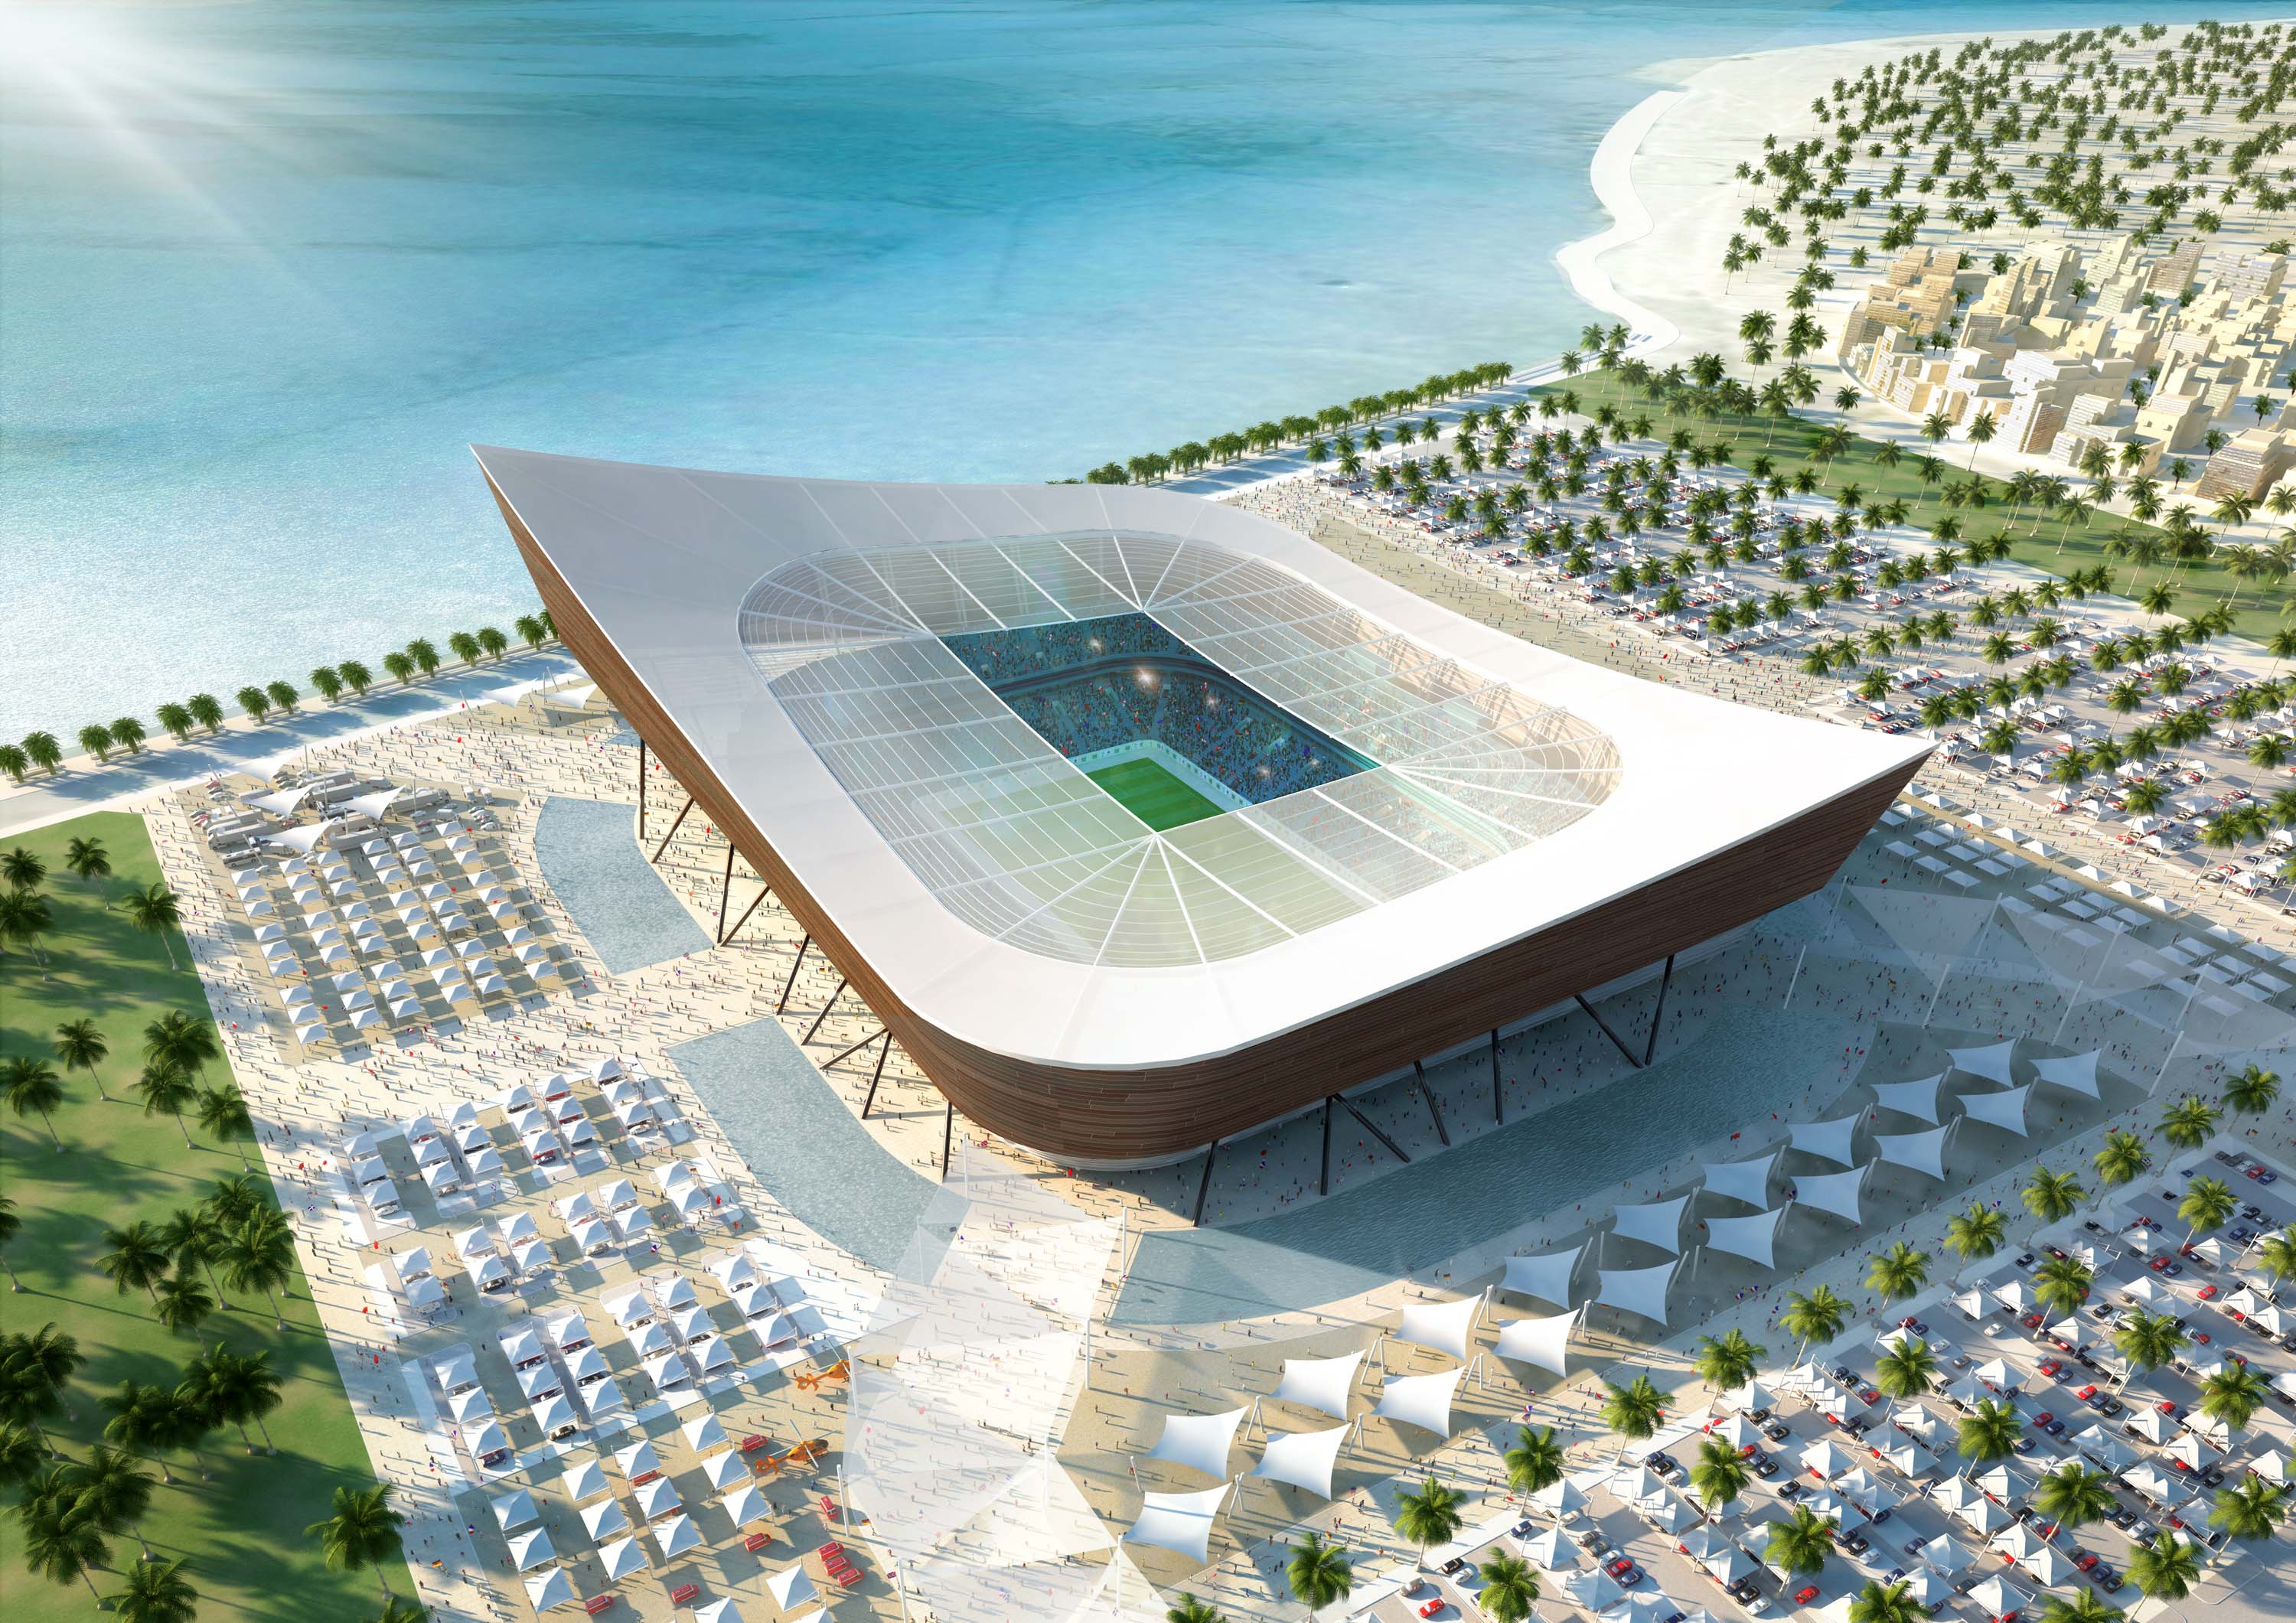 Qatar World Cup Stadiums Wallpaper 1 - Qatar Building For World Cup , HD Wallpaper & Backgrounds